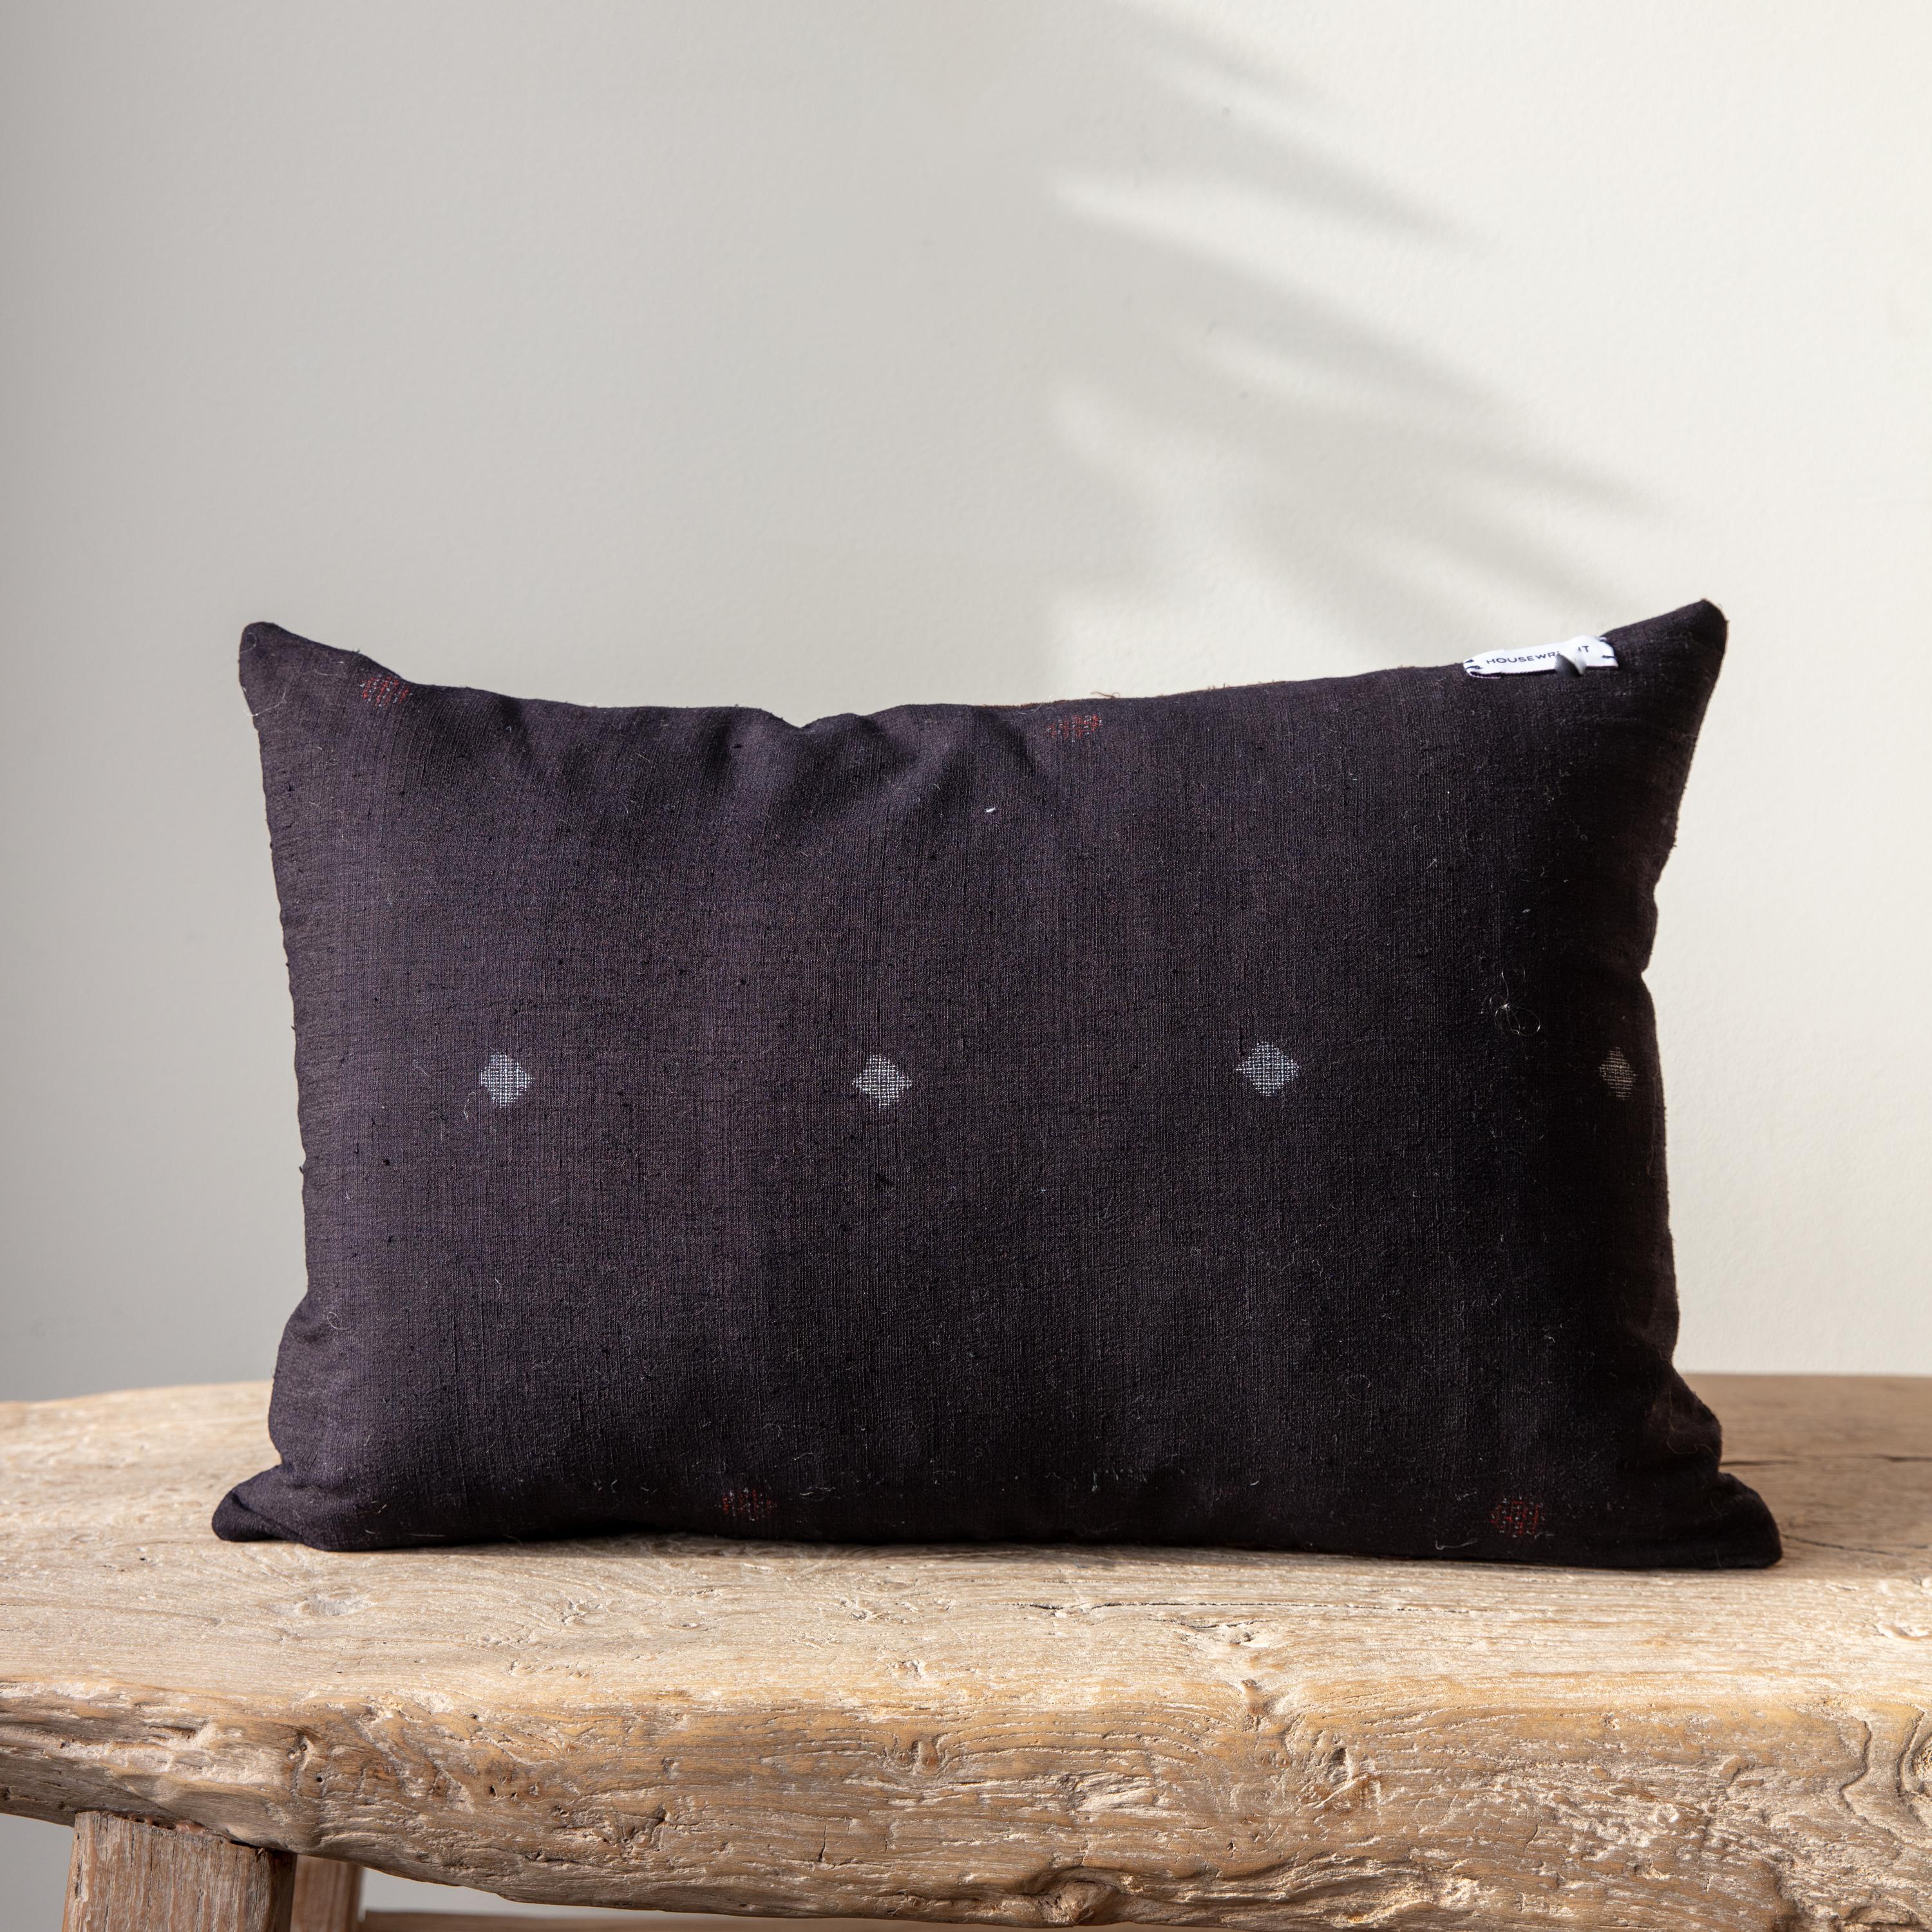 100% down fill, zipper closures.

Dry-clean only.

Handmade in Seattle, WA.

Each one-of-a-kind pillow is handcrafted in the Pacific Northwest with unexpected details from hardware to seams and selvage.